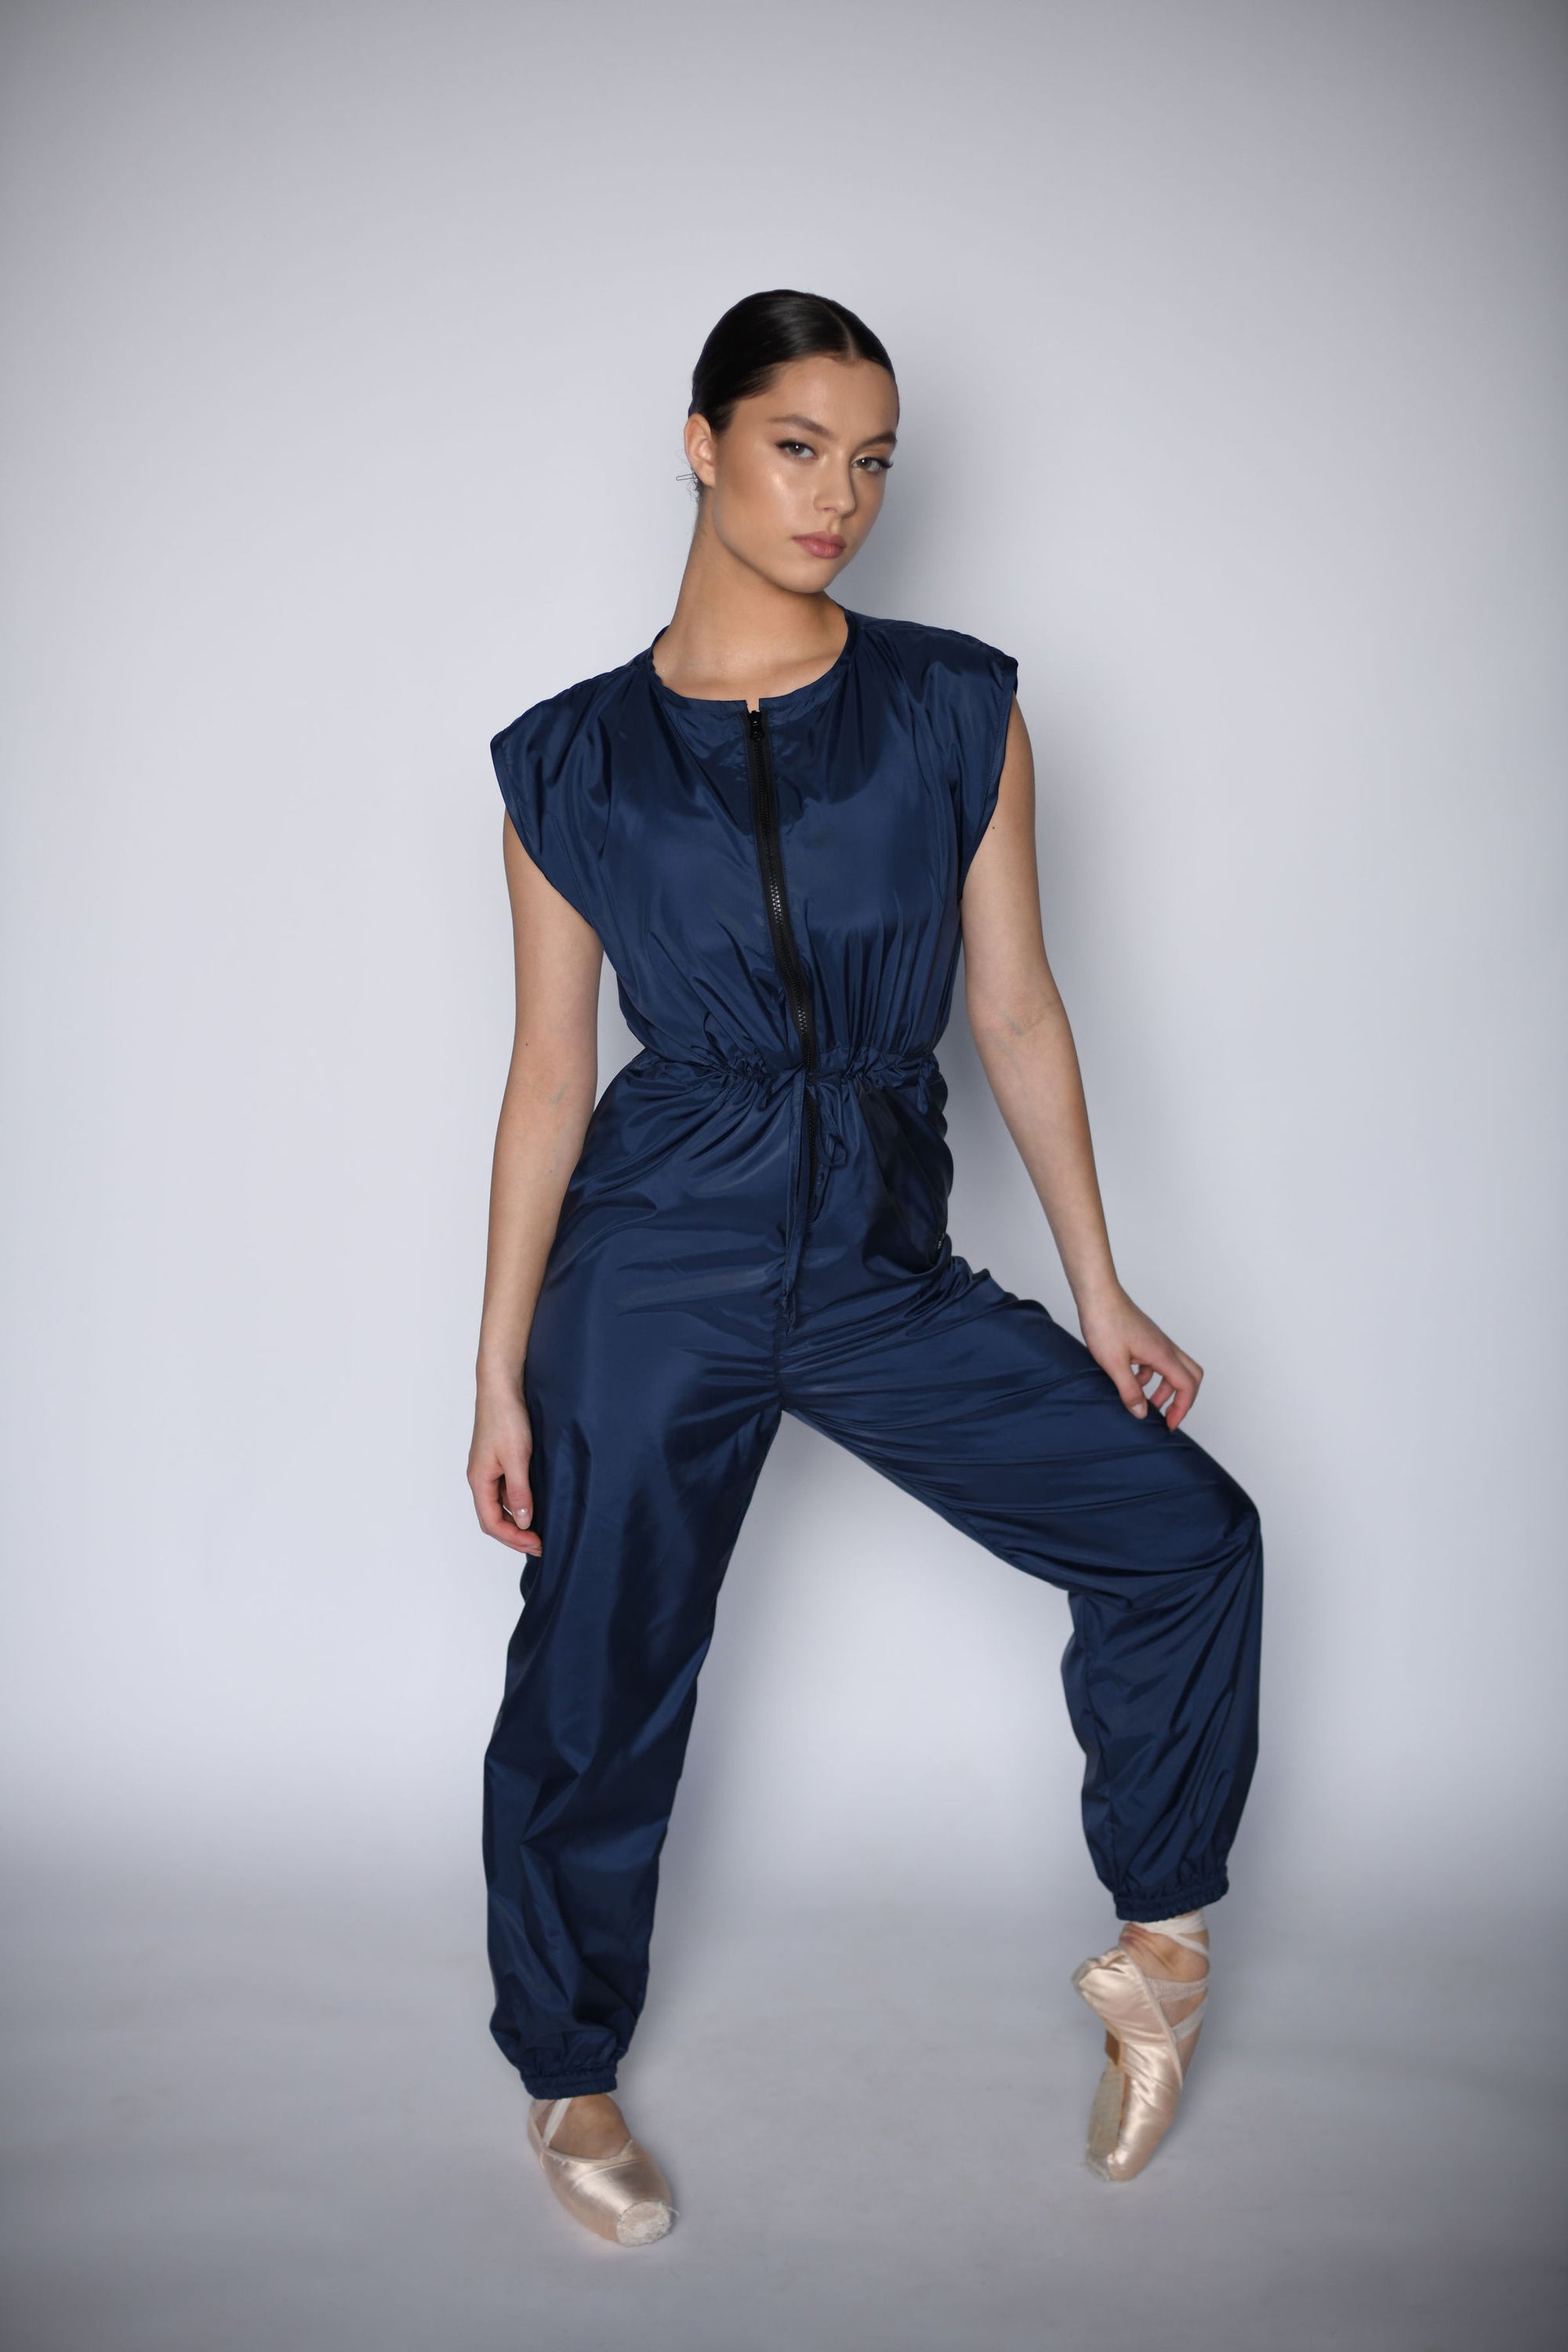 NEW URBAN SWAN COLLECTION S/S 23 | Royal blue jumpsuit